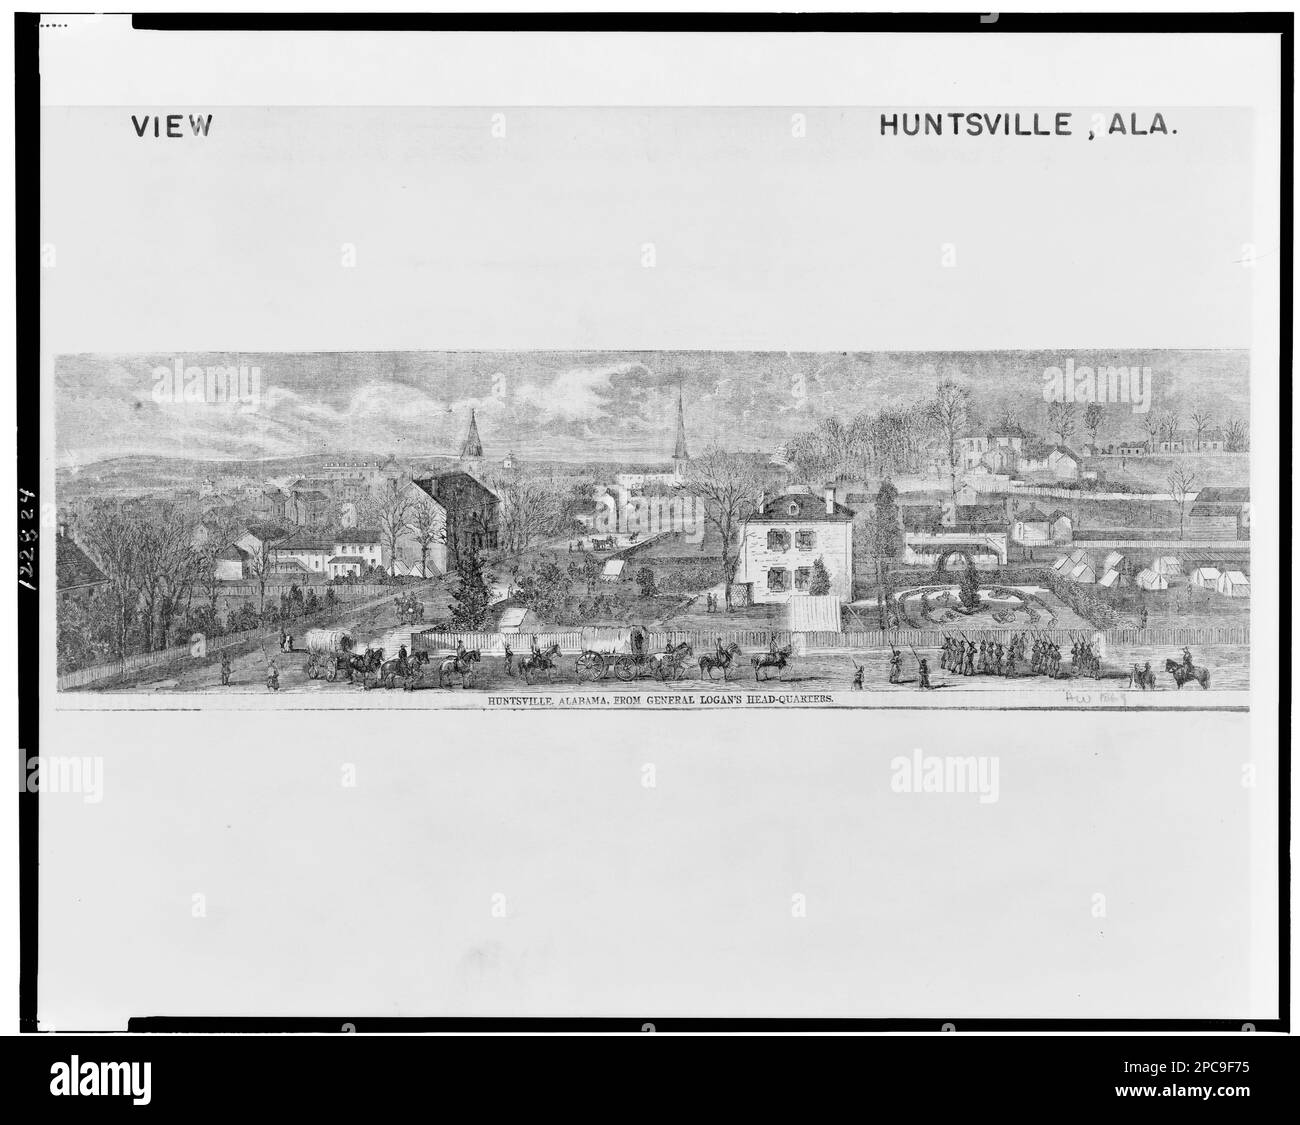 Huntsville, Alabama, from General Logan's head-quarters. Civil War Collection , Illus. from: Harper's weekly, 1864. Huntsville (Ala.), 1860-1870, United States, History, Civil War, 1861-1865, Military personnel. Stock Photo